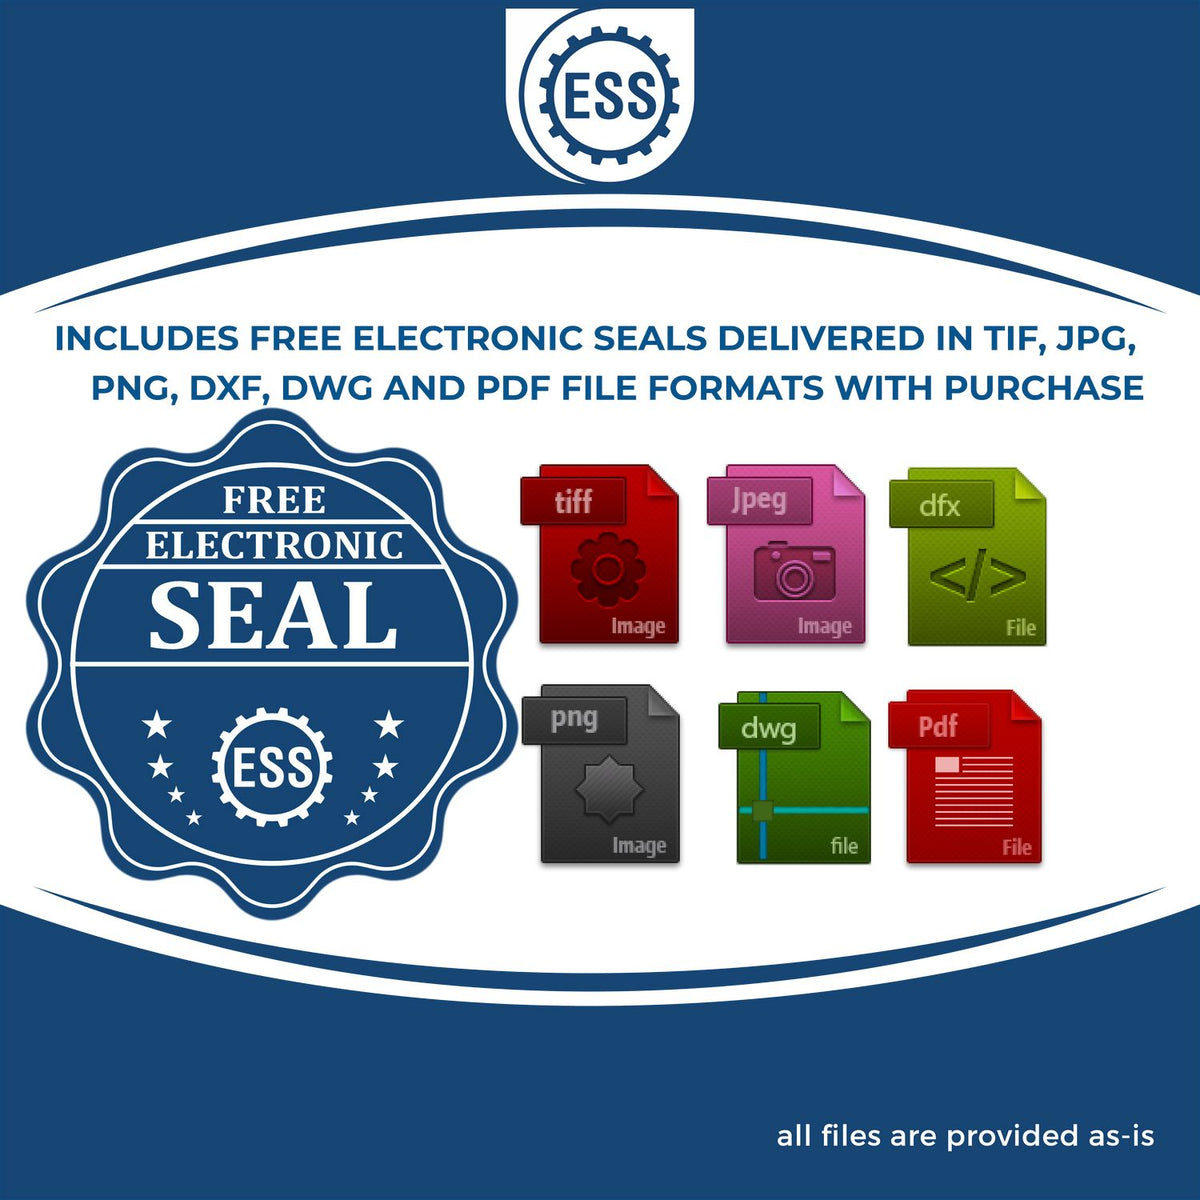 An infographic for the free electronic seal for the Arizona Professional Engineer Seal Stamp illustrating the different file type icons such as DXF, DWG, TIF, JPG and PNG.